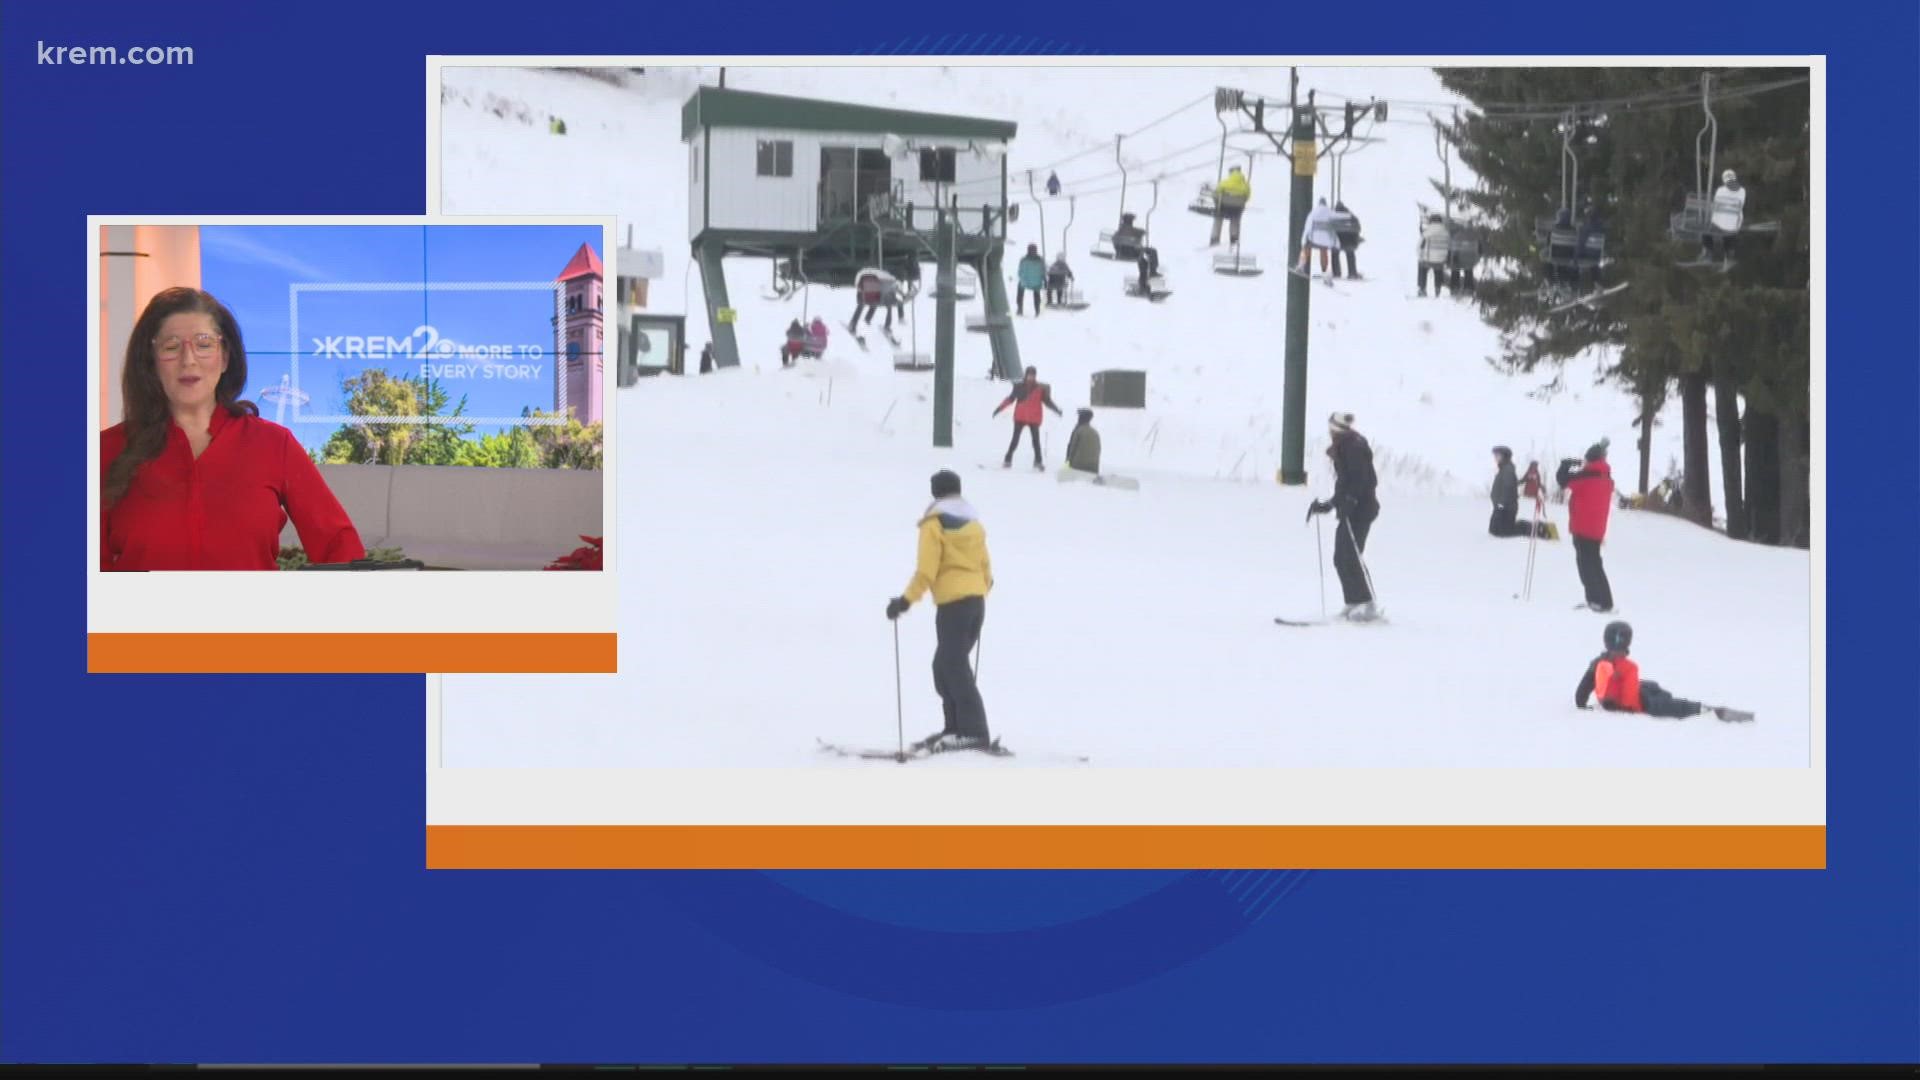 Some ski resorts will be reopening this Friday including 49 Degrees North and Mt. Spokane Ski & Snowboard Park.